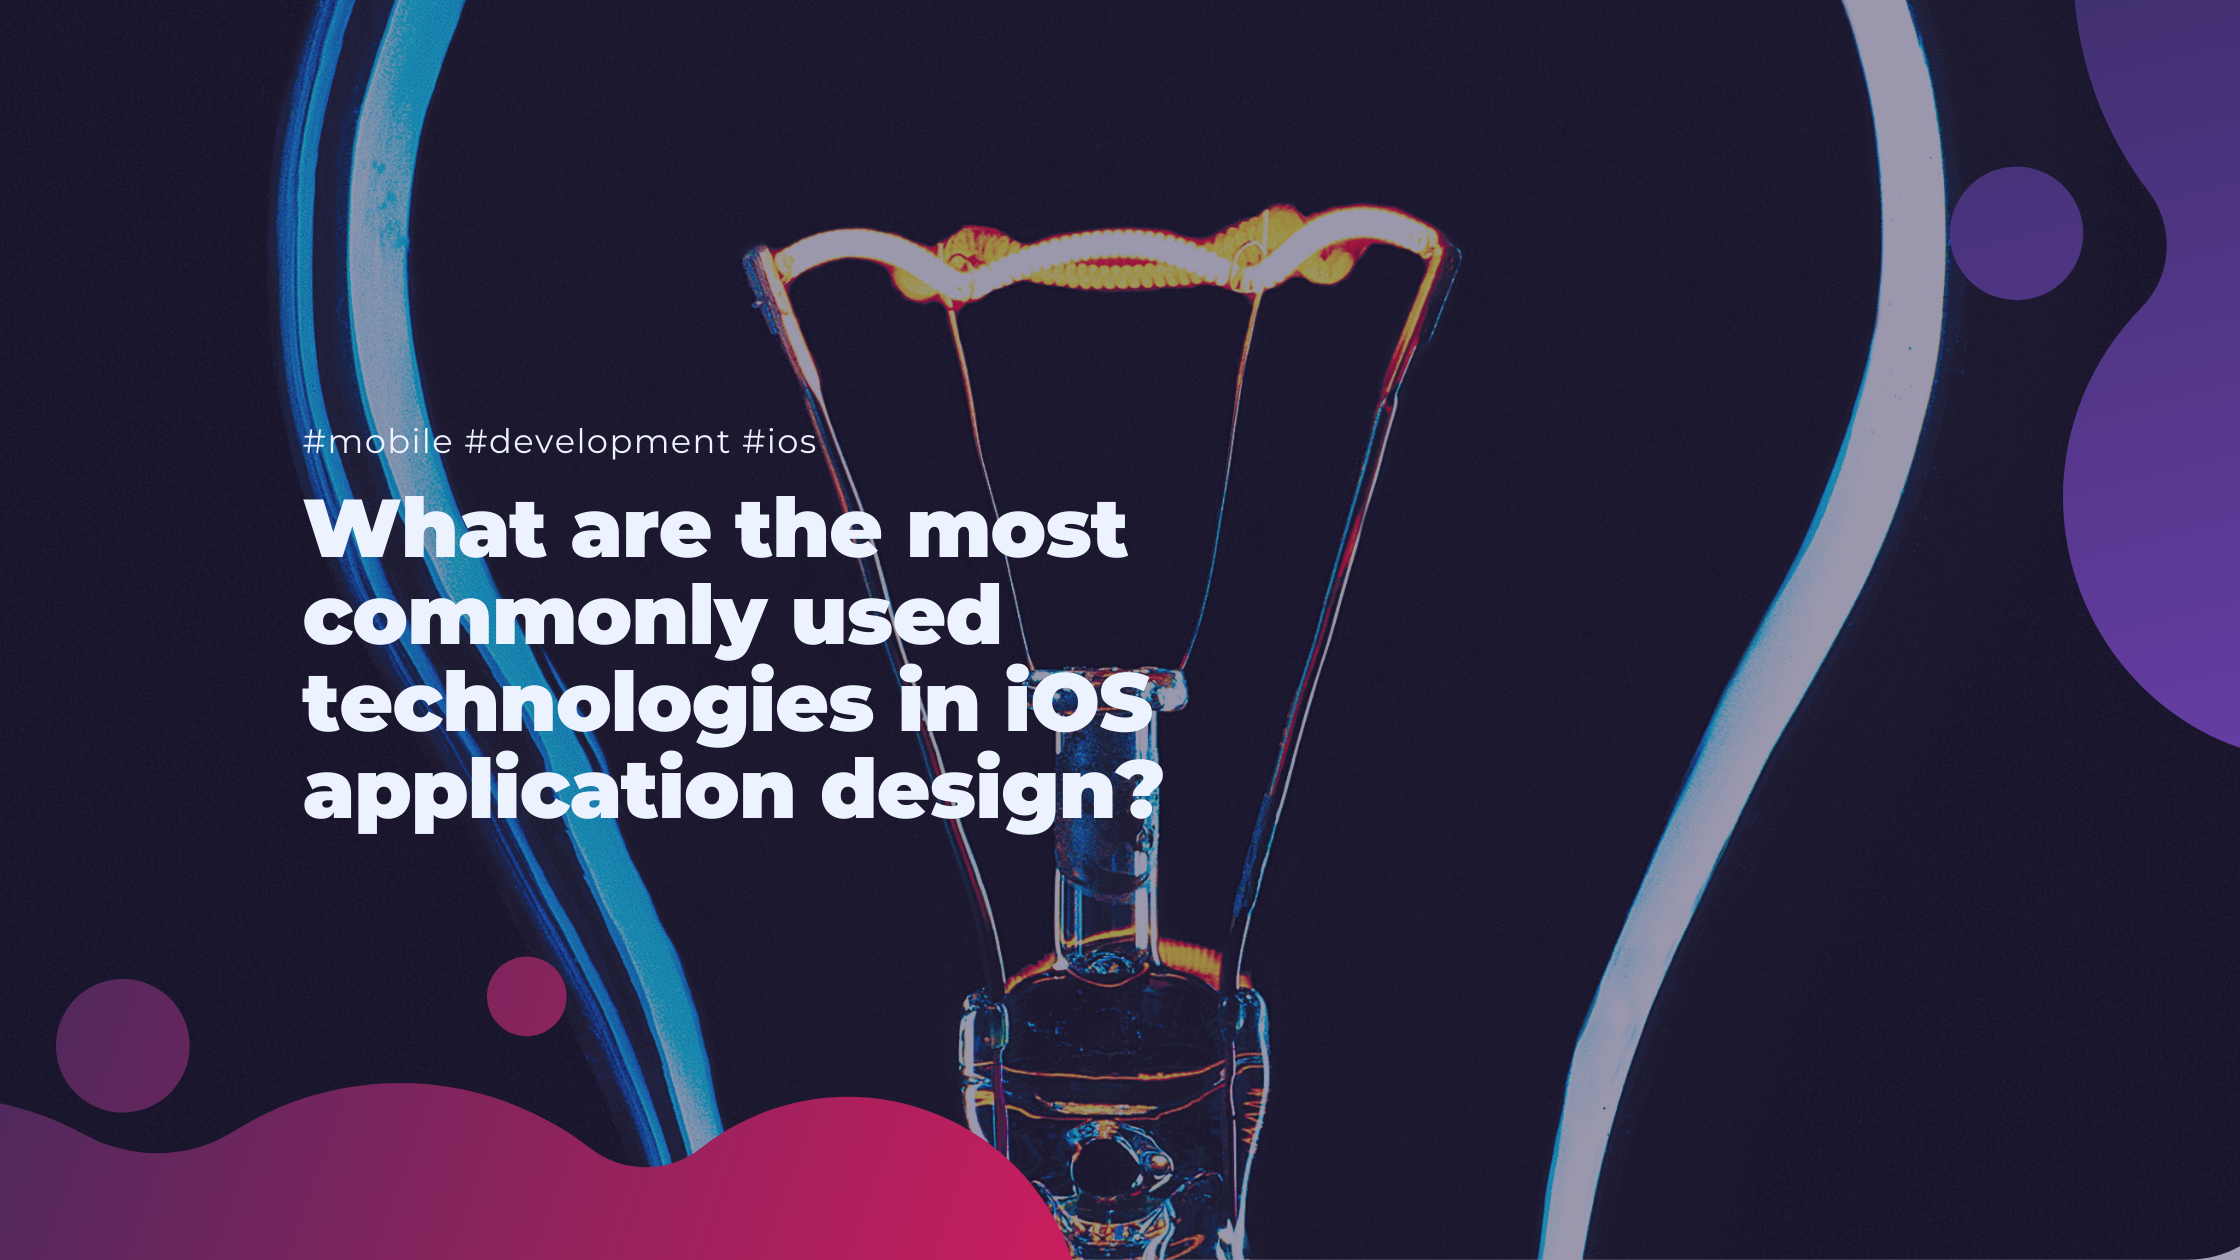 What are the most commonly used technologies in iOS application design?